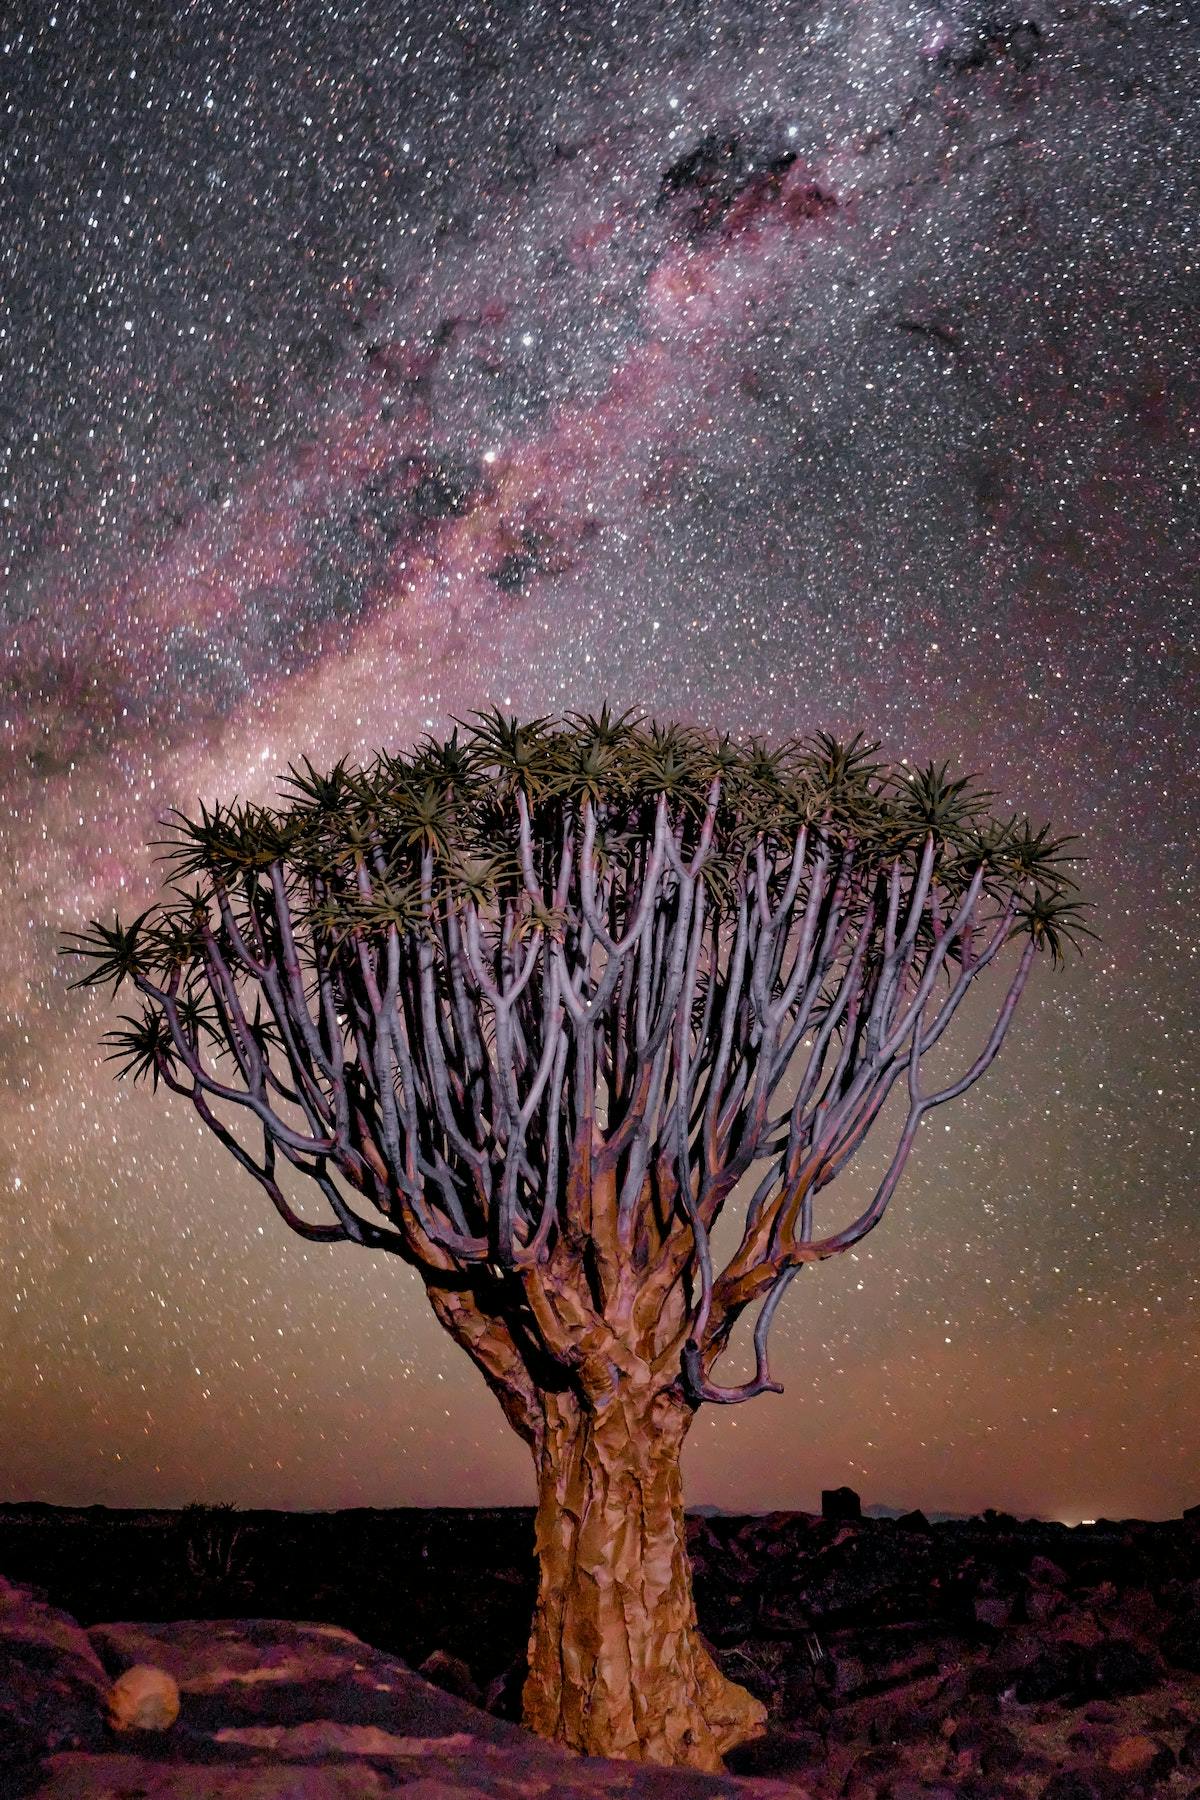 A quiver tree against the night sky with the milky way clearly visible